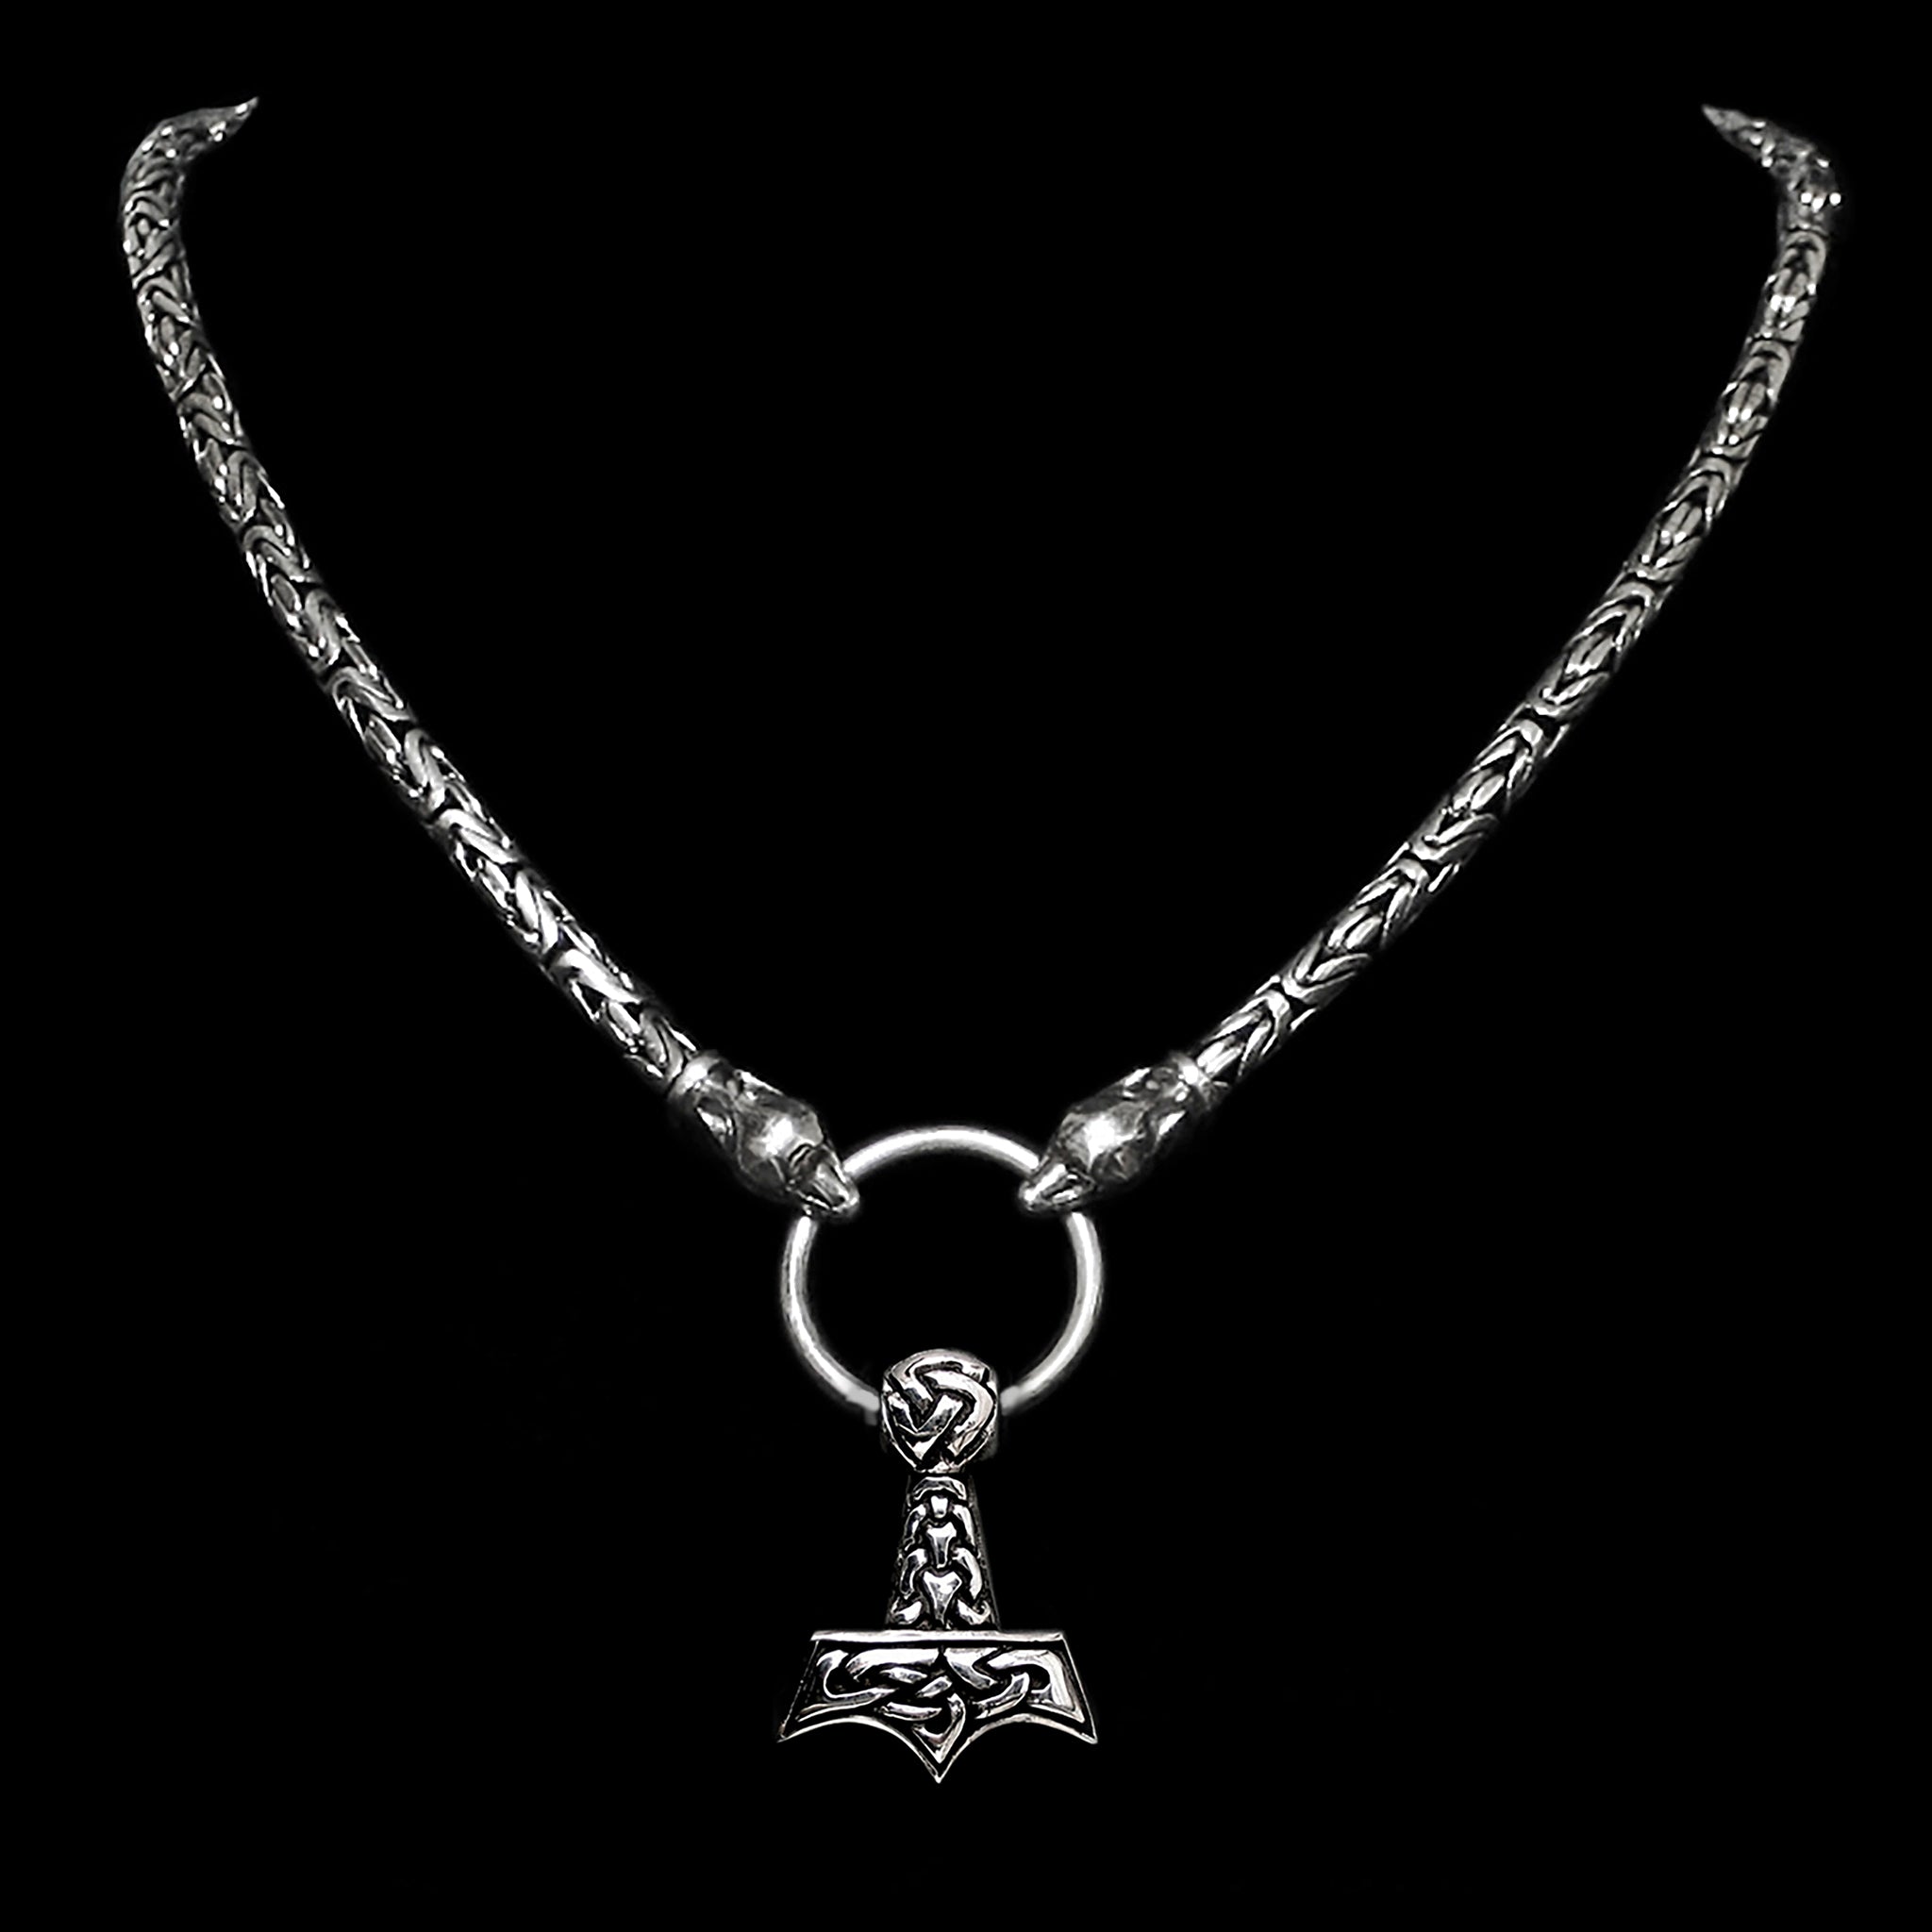 5mm Thick Silver King Chain Thors Hammer Necklace with Ferocious Wolf Heads - Knotworkj Thors Hammer